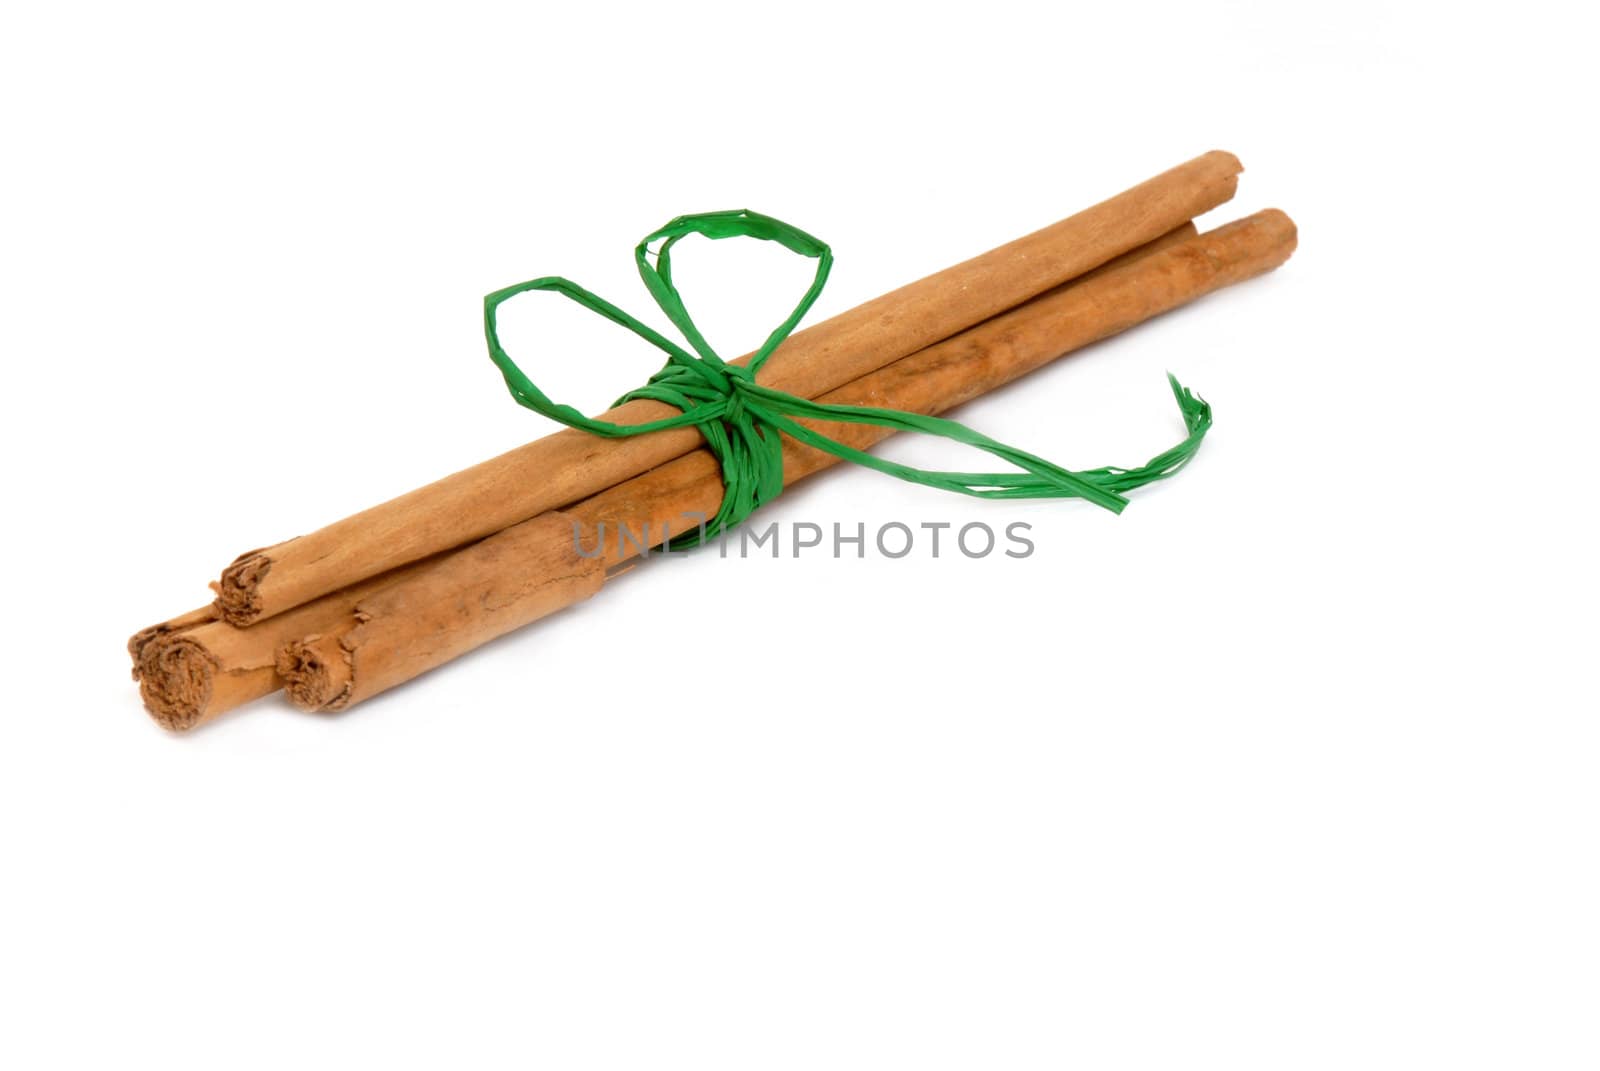 cinnamon sticks tied with a green ribbon isolated on white background 